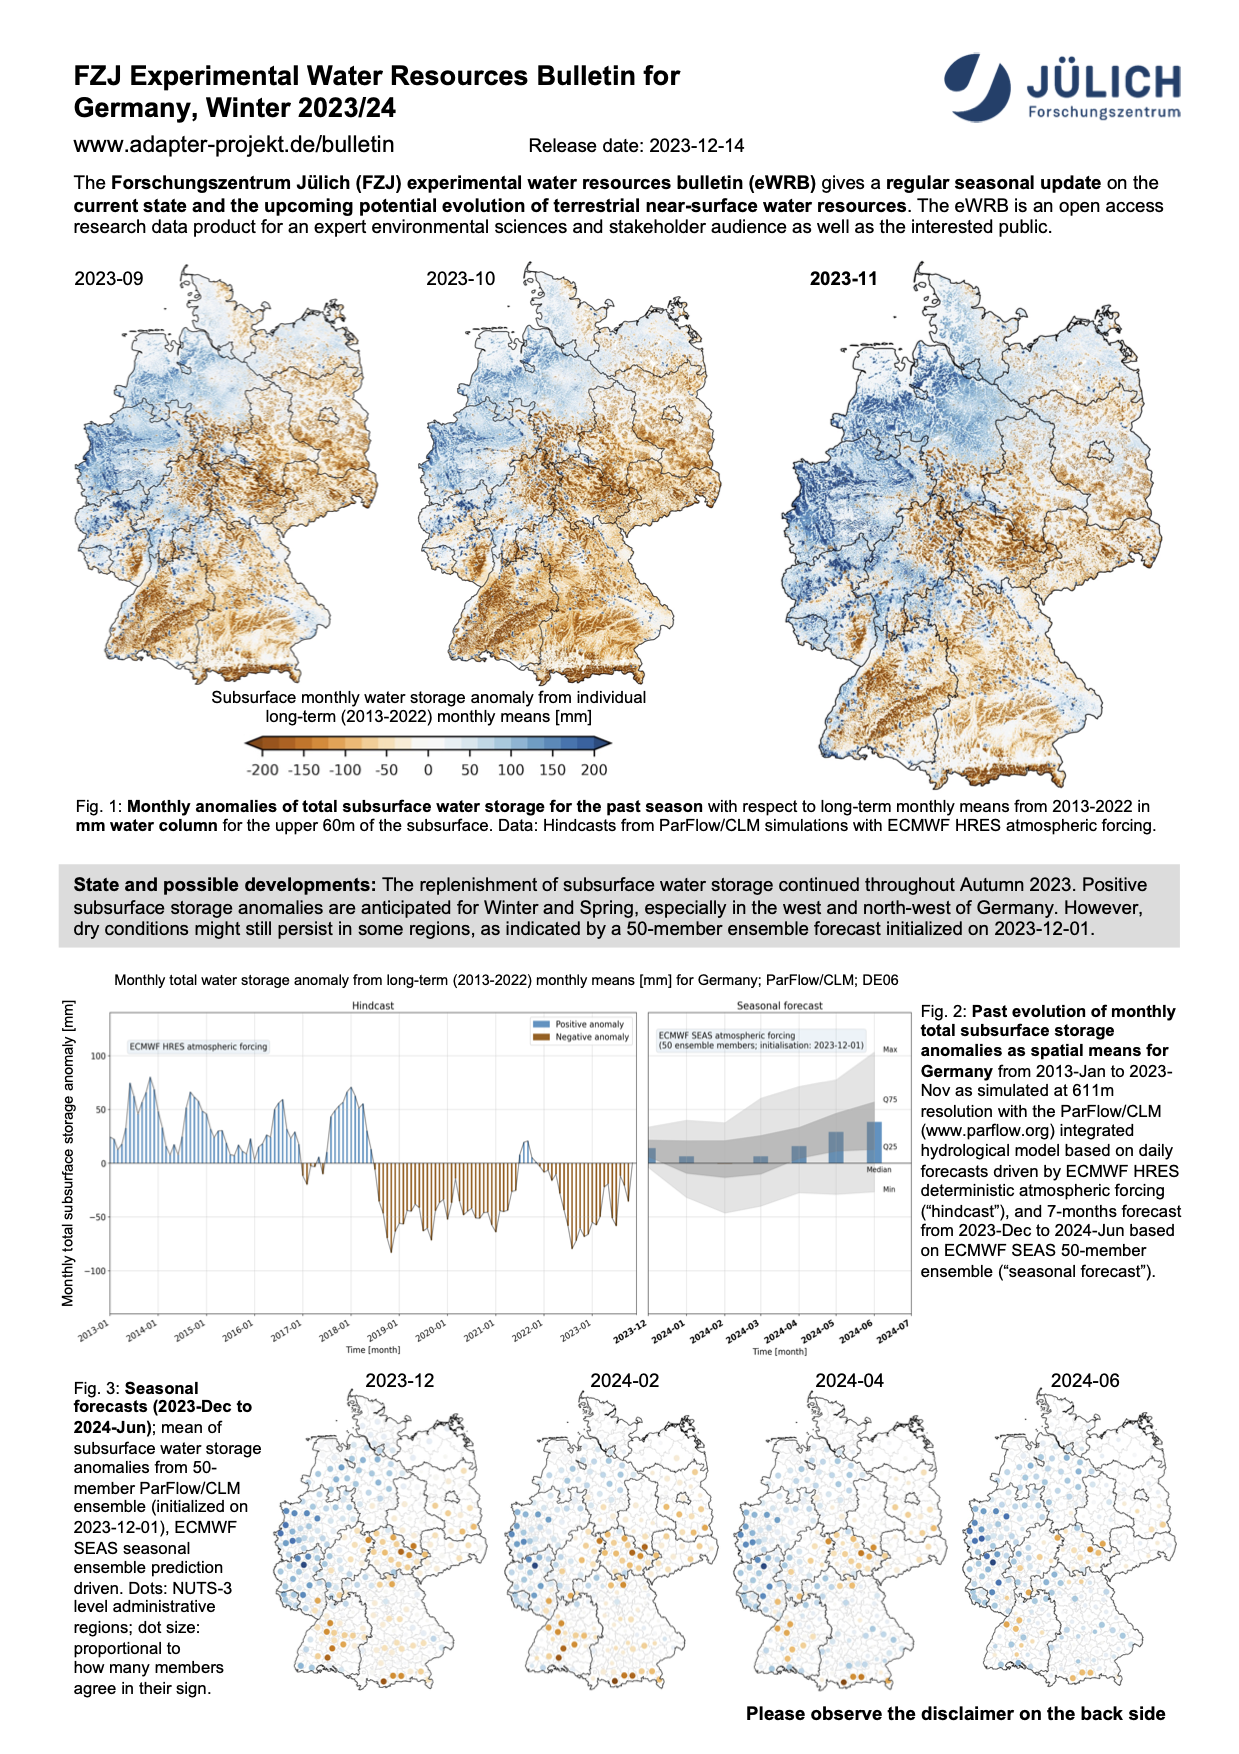 FZJ Experimental Water Resources Bulletin for Germany Winter 2023-24